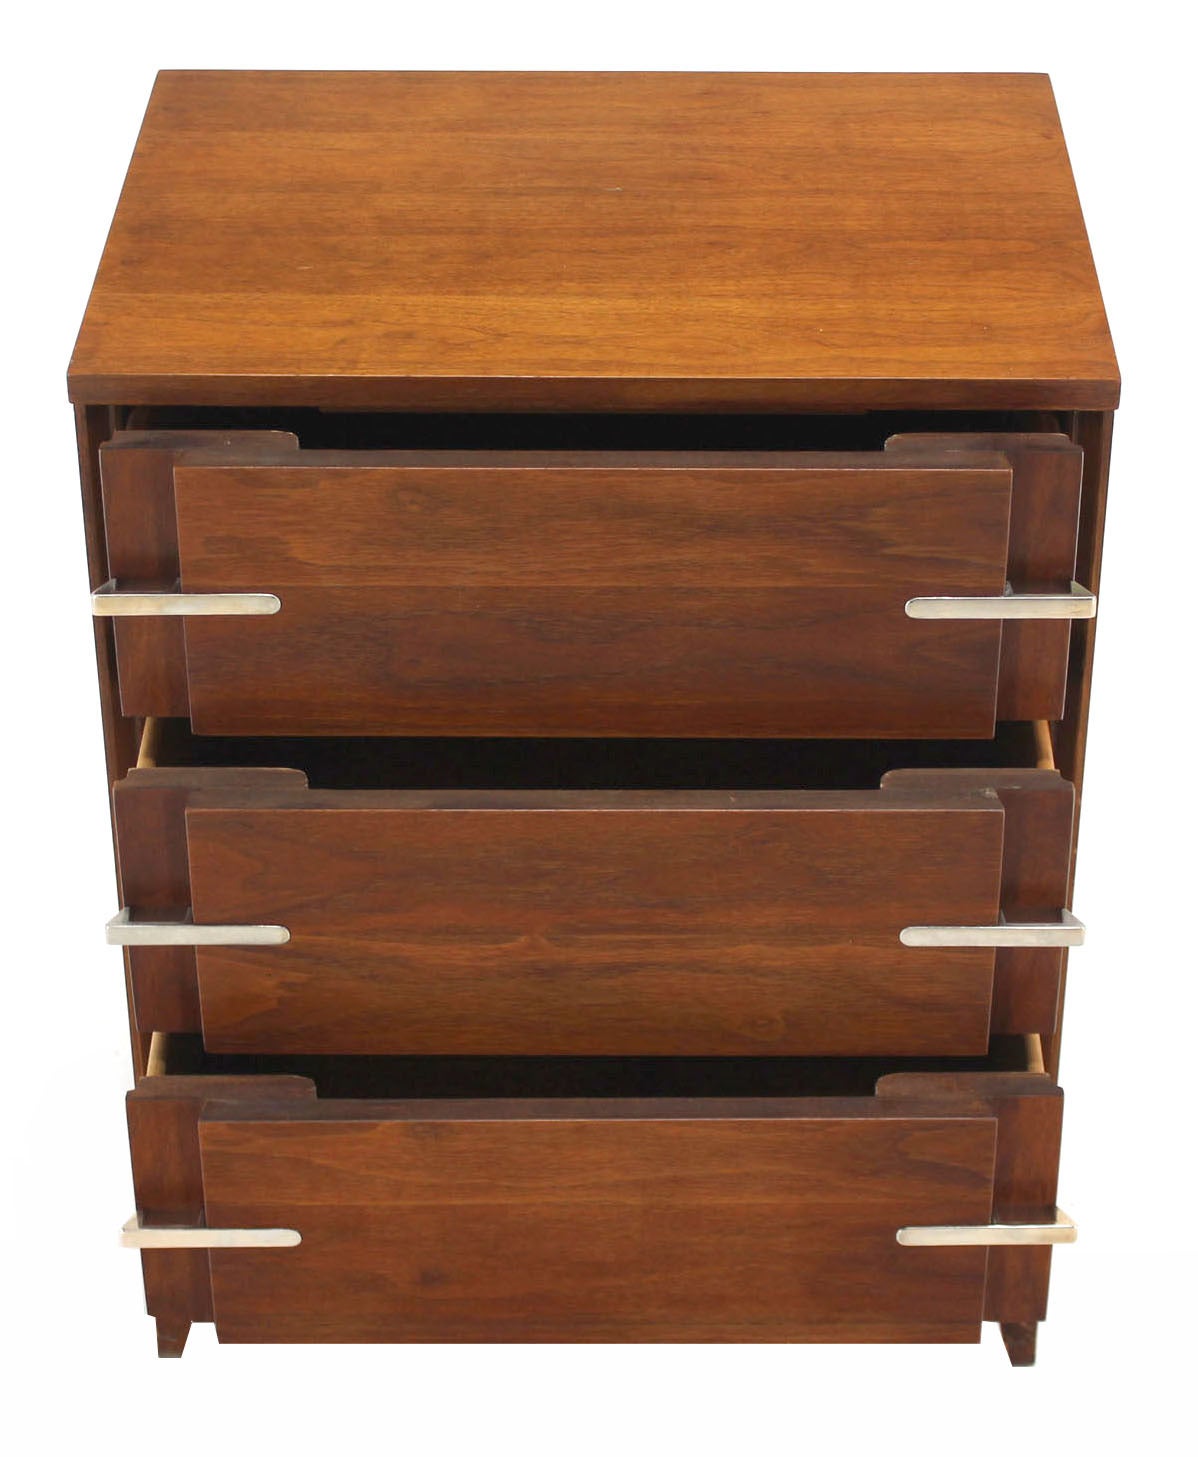 Mid-Century Modern Walnut Bachelor Chest or Dresser with Accent Drawer Pulls 3